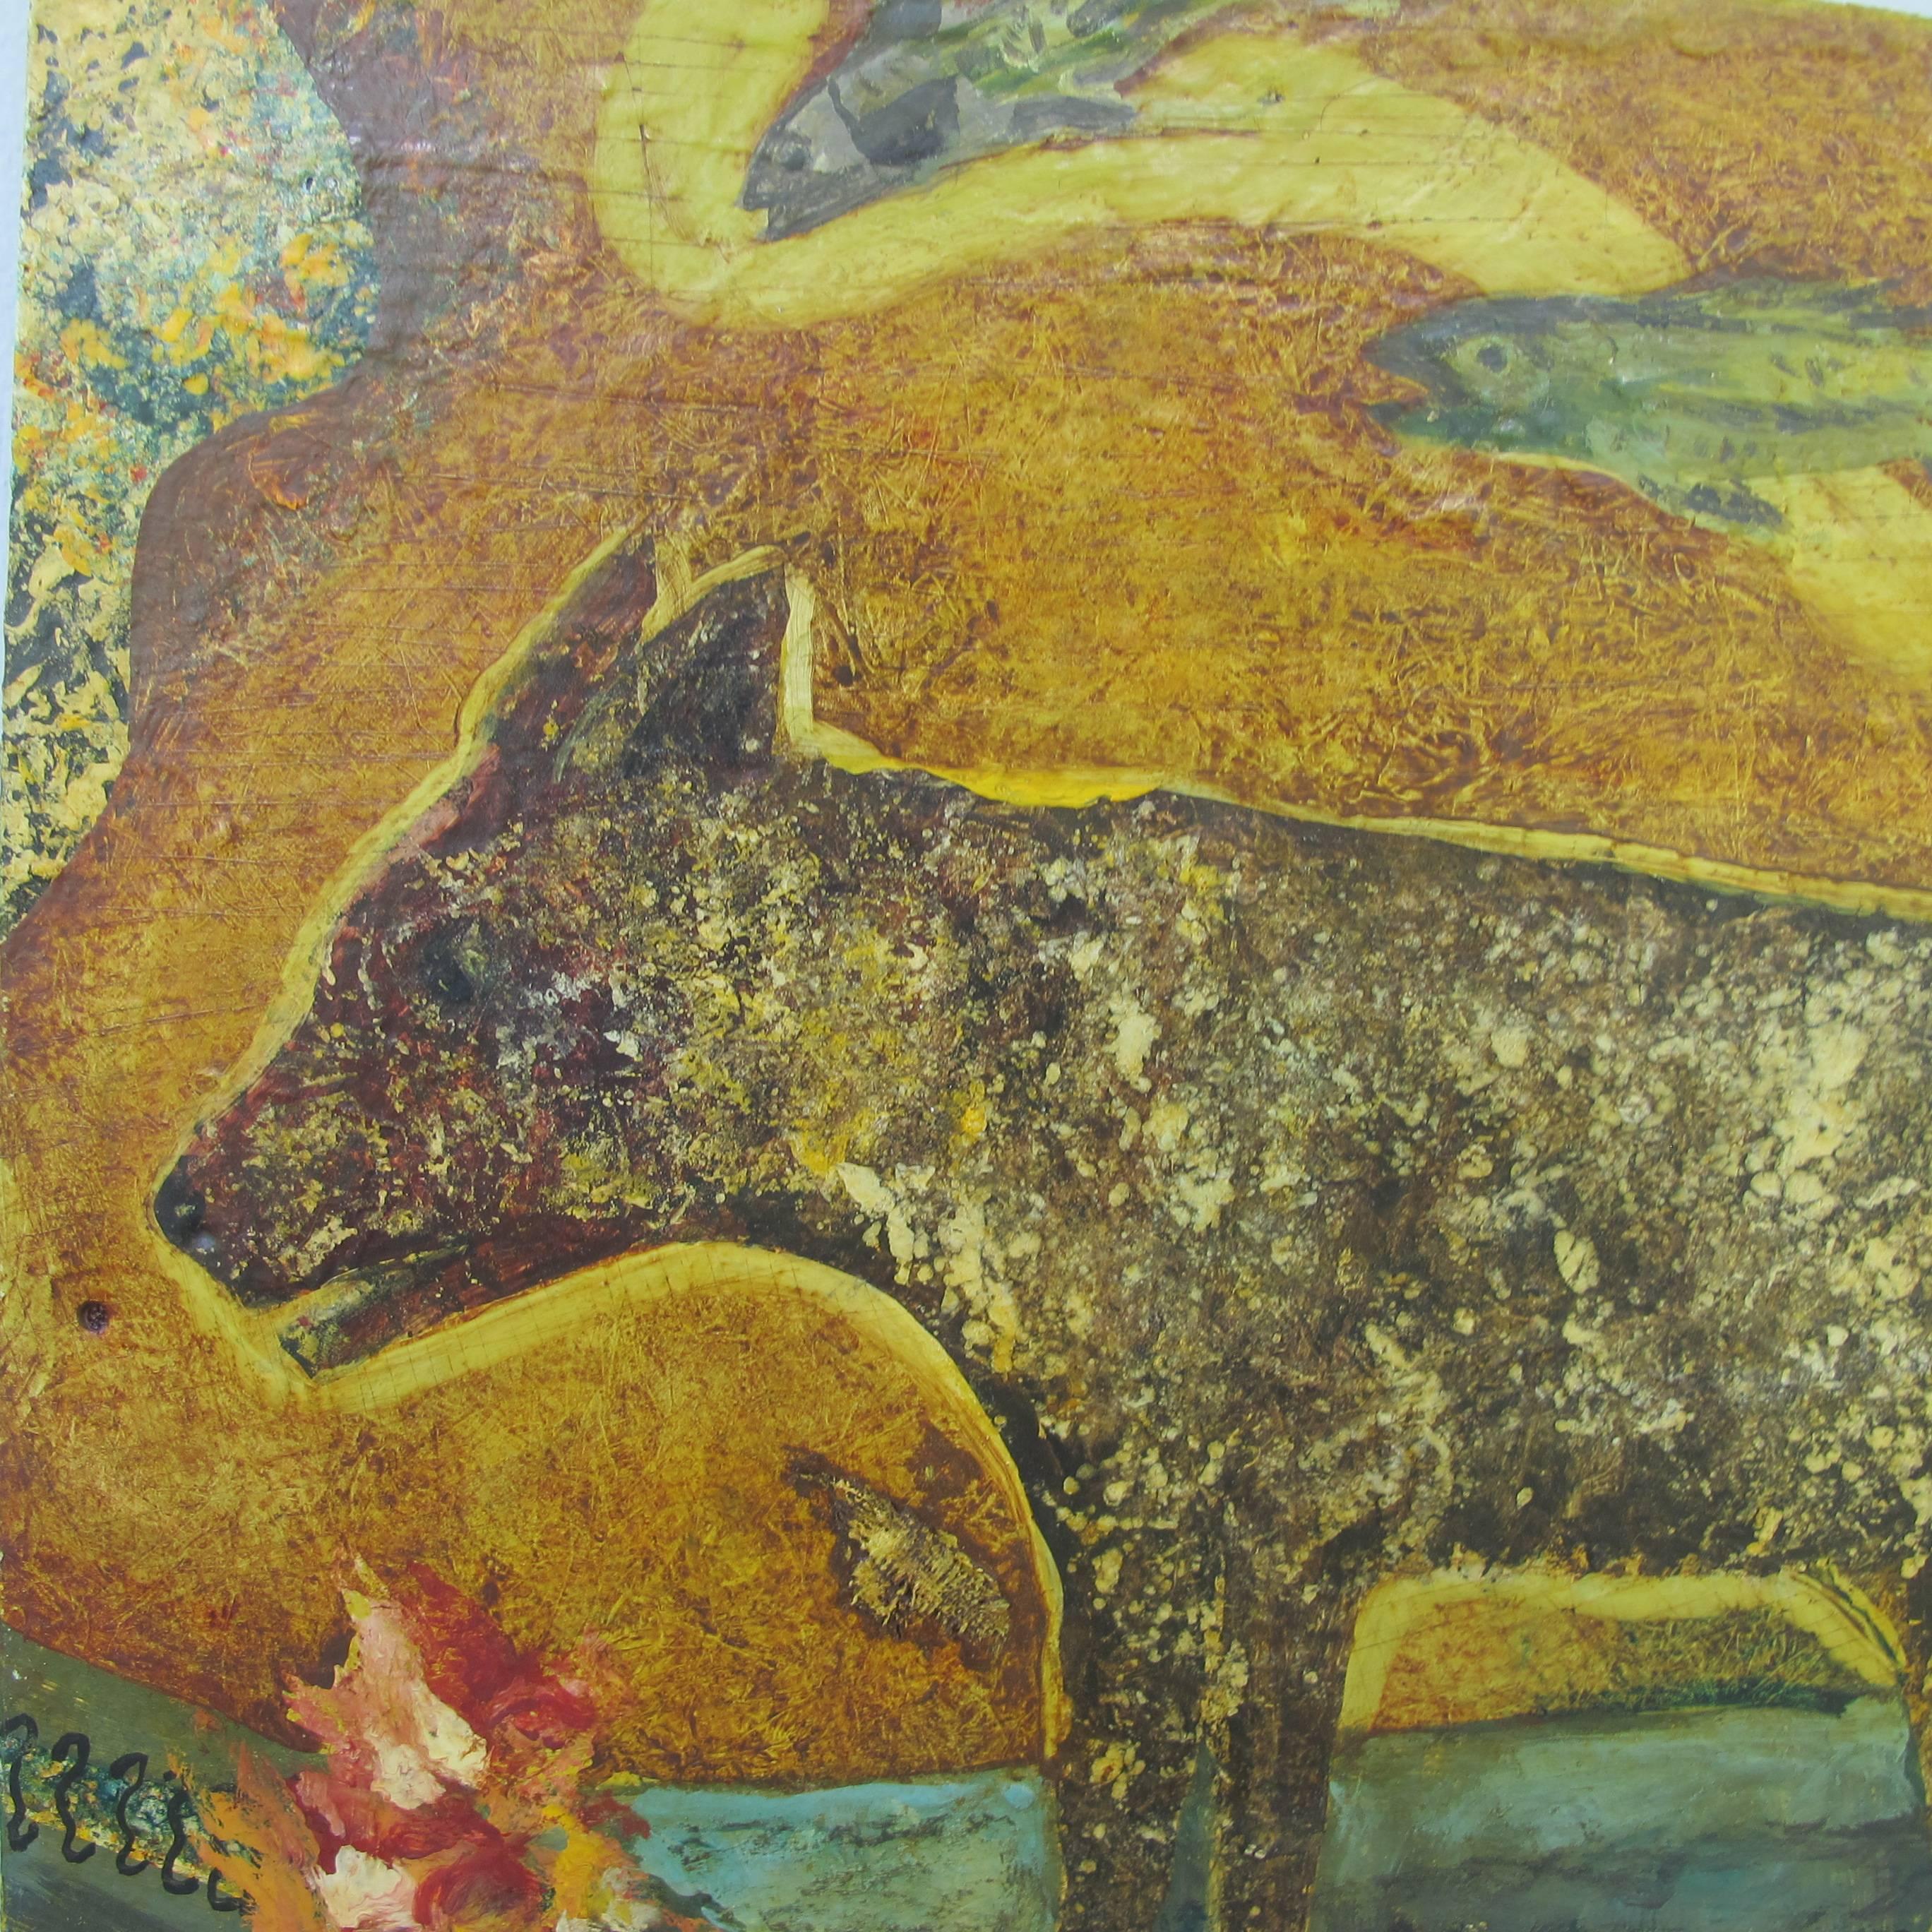 Terry Turrell a self-taught artist from the northwest often uses his dogs and cats as subjects in his improvisational paintings. The animals are often soulful and showing emotions. Working on found materials this is painted on aluminum with wood